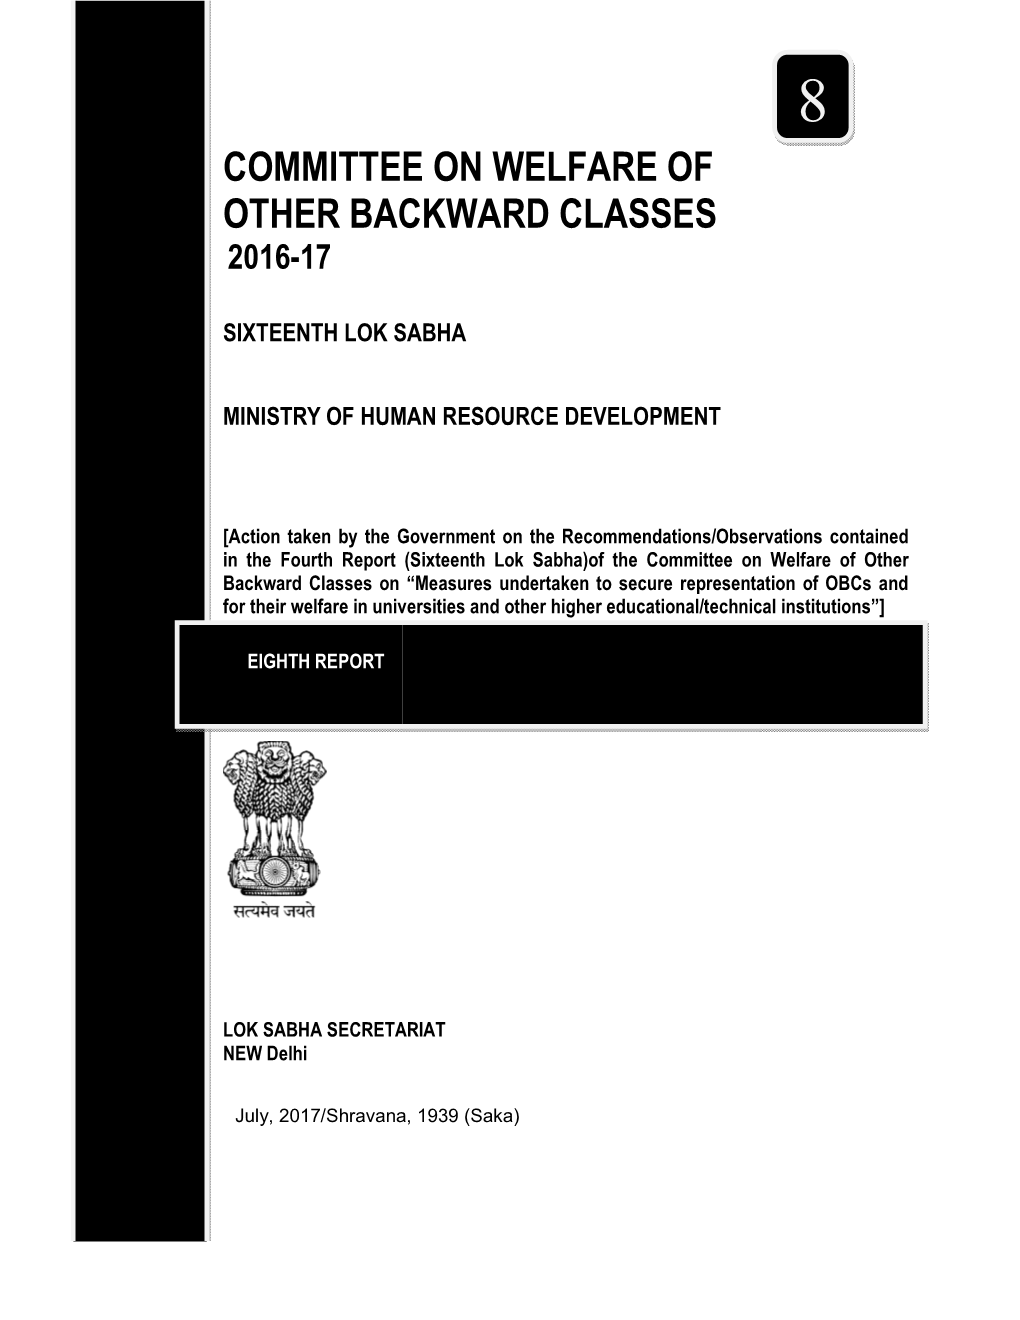 Committee on Welfare of Other Backward Classes 2016-17